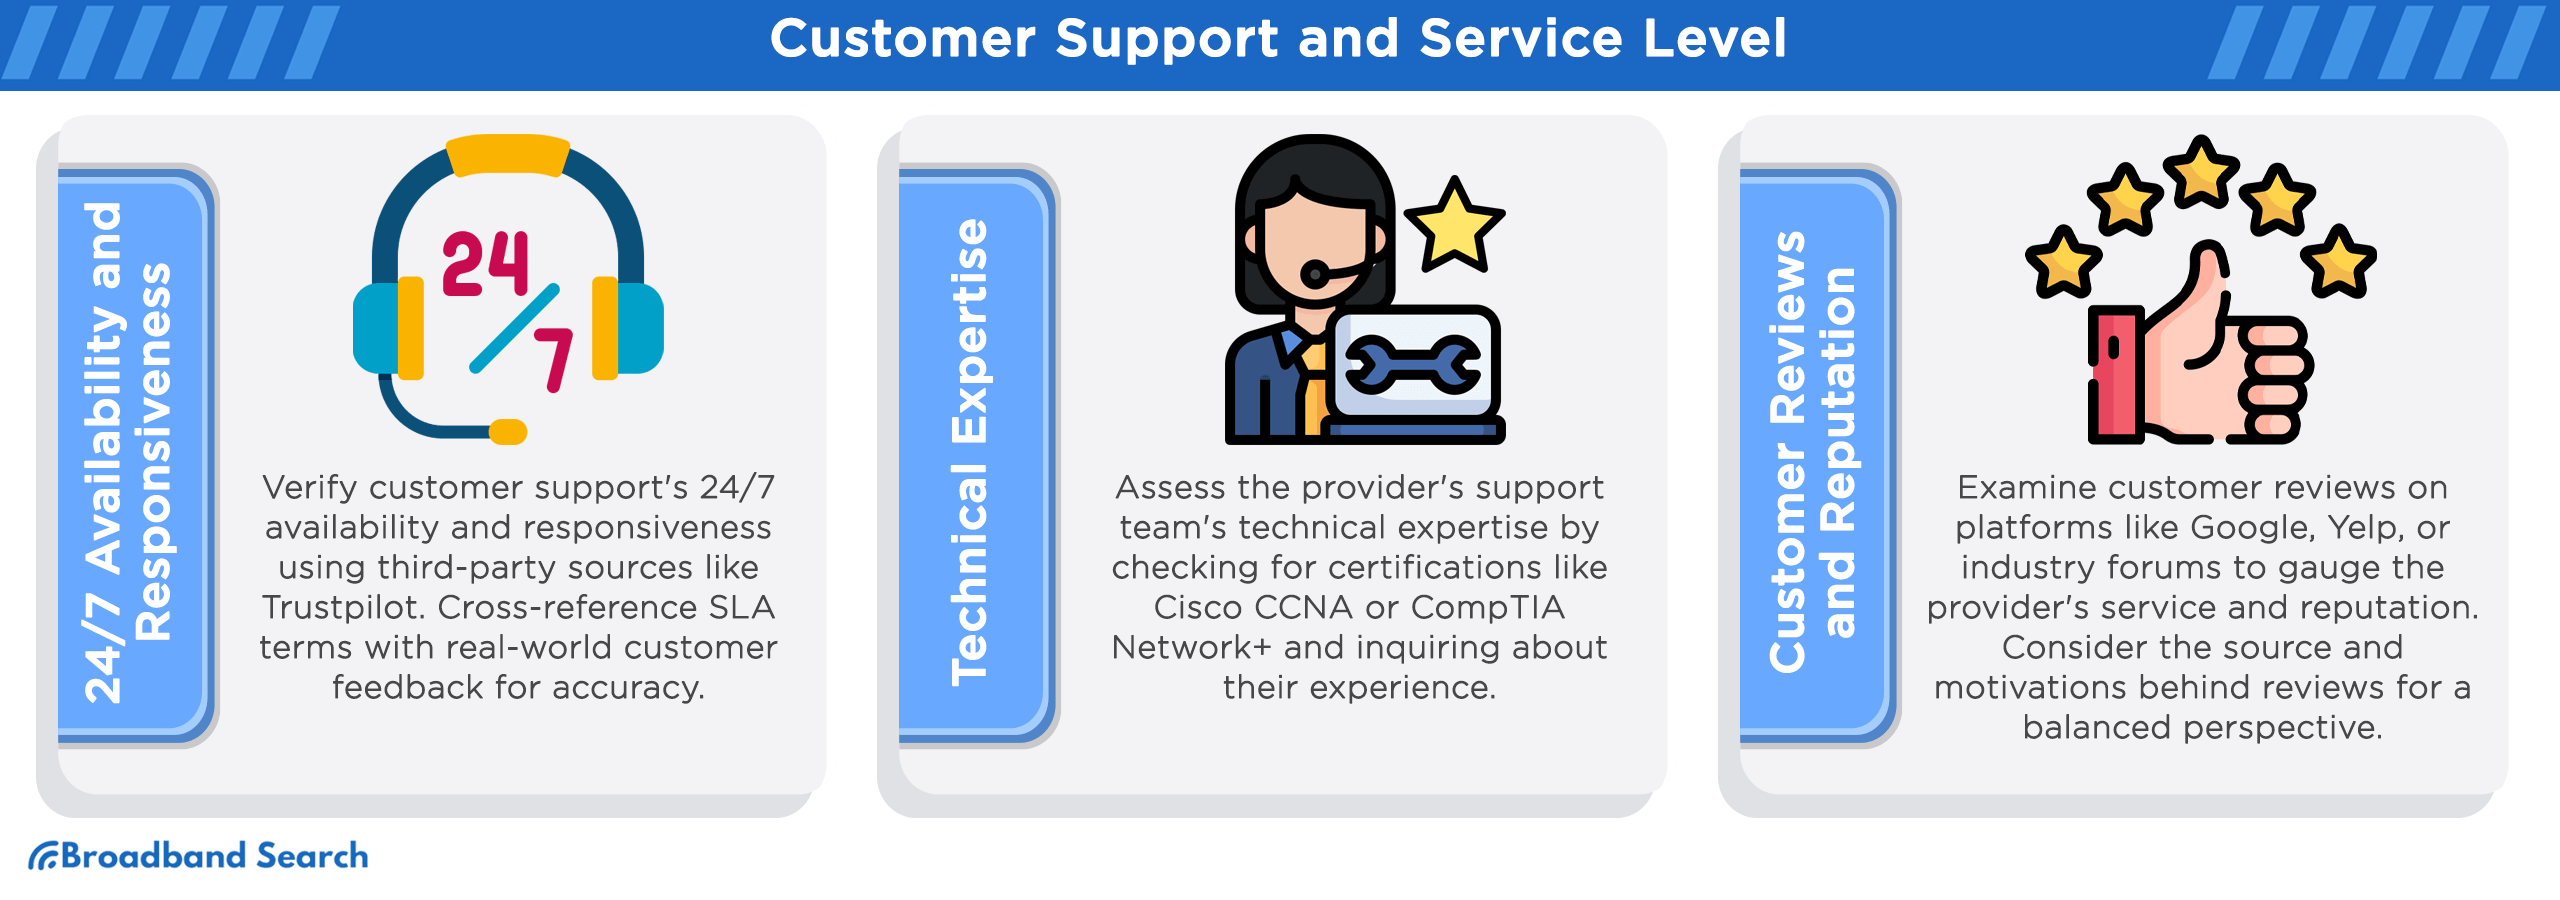 Details on customer support and service level